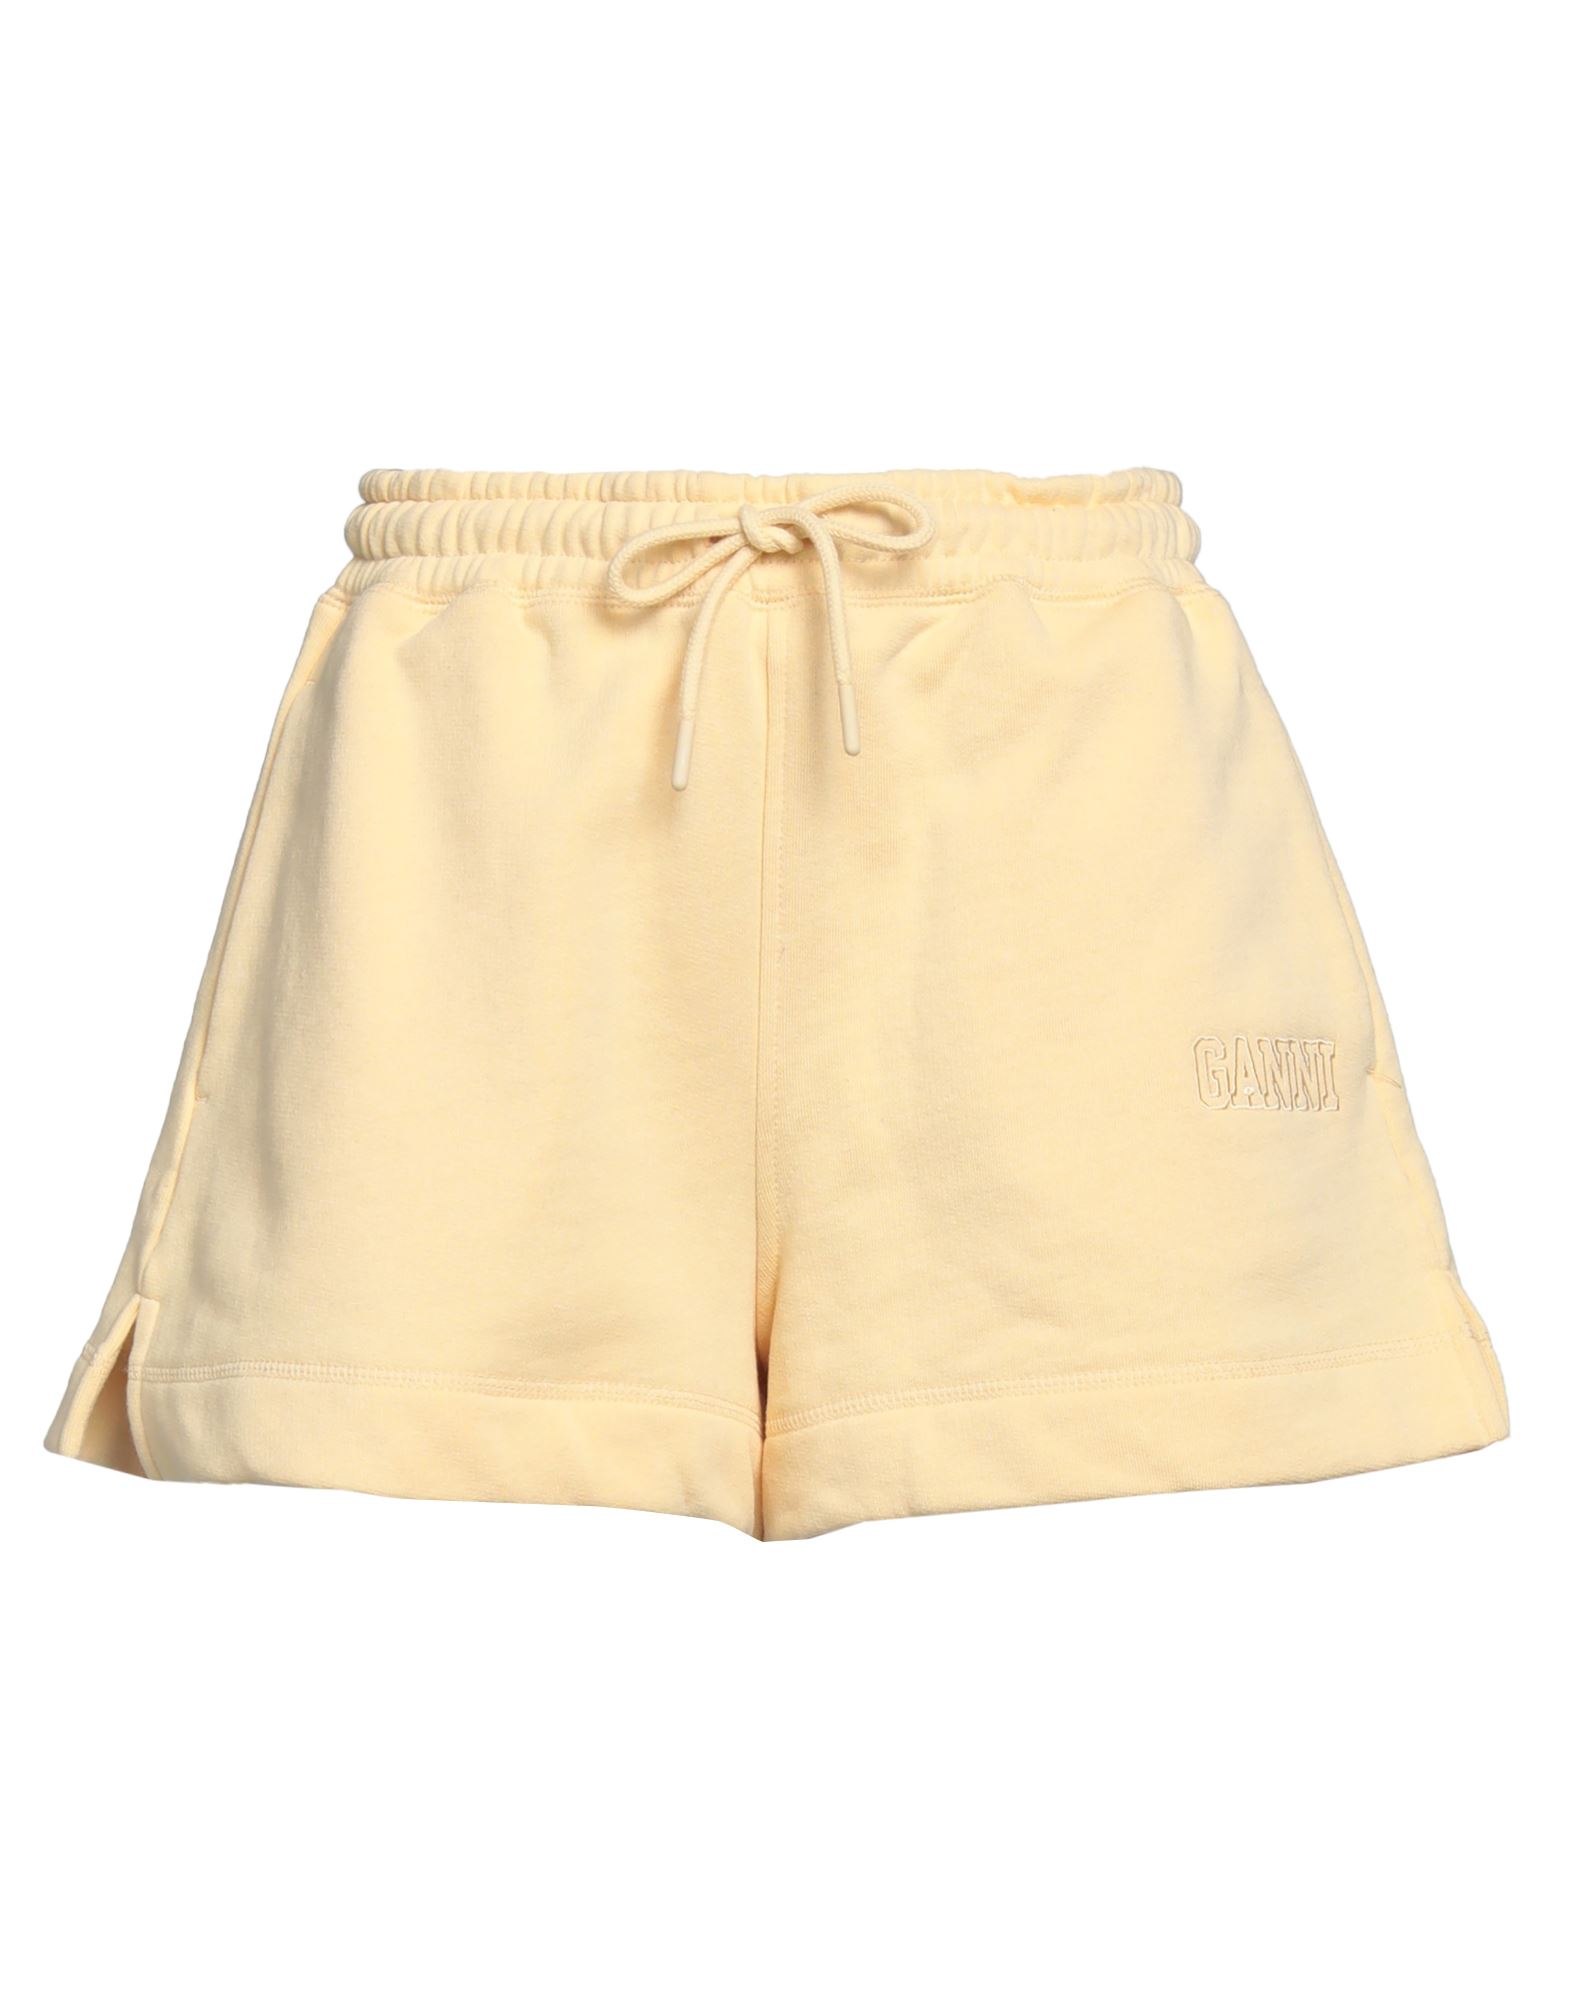 Ganni Woman Shorts & Bermuda Shorts Light Yellow Size Xl Recycled Cotton, Recycled Polyester